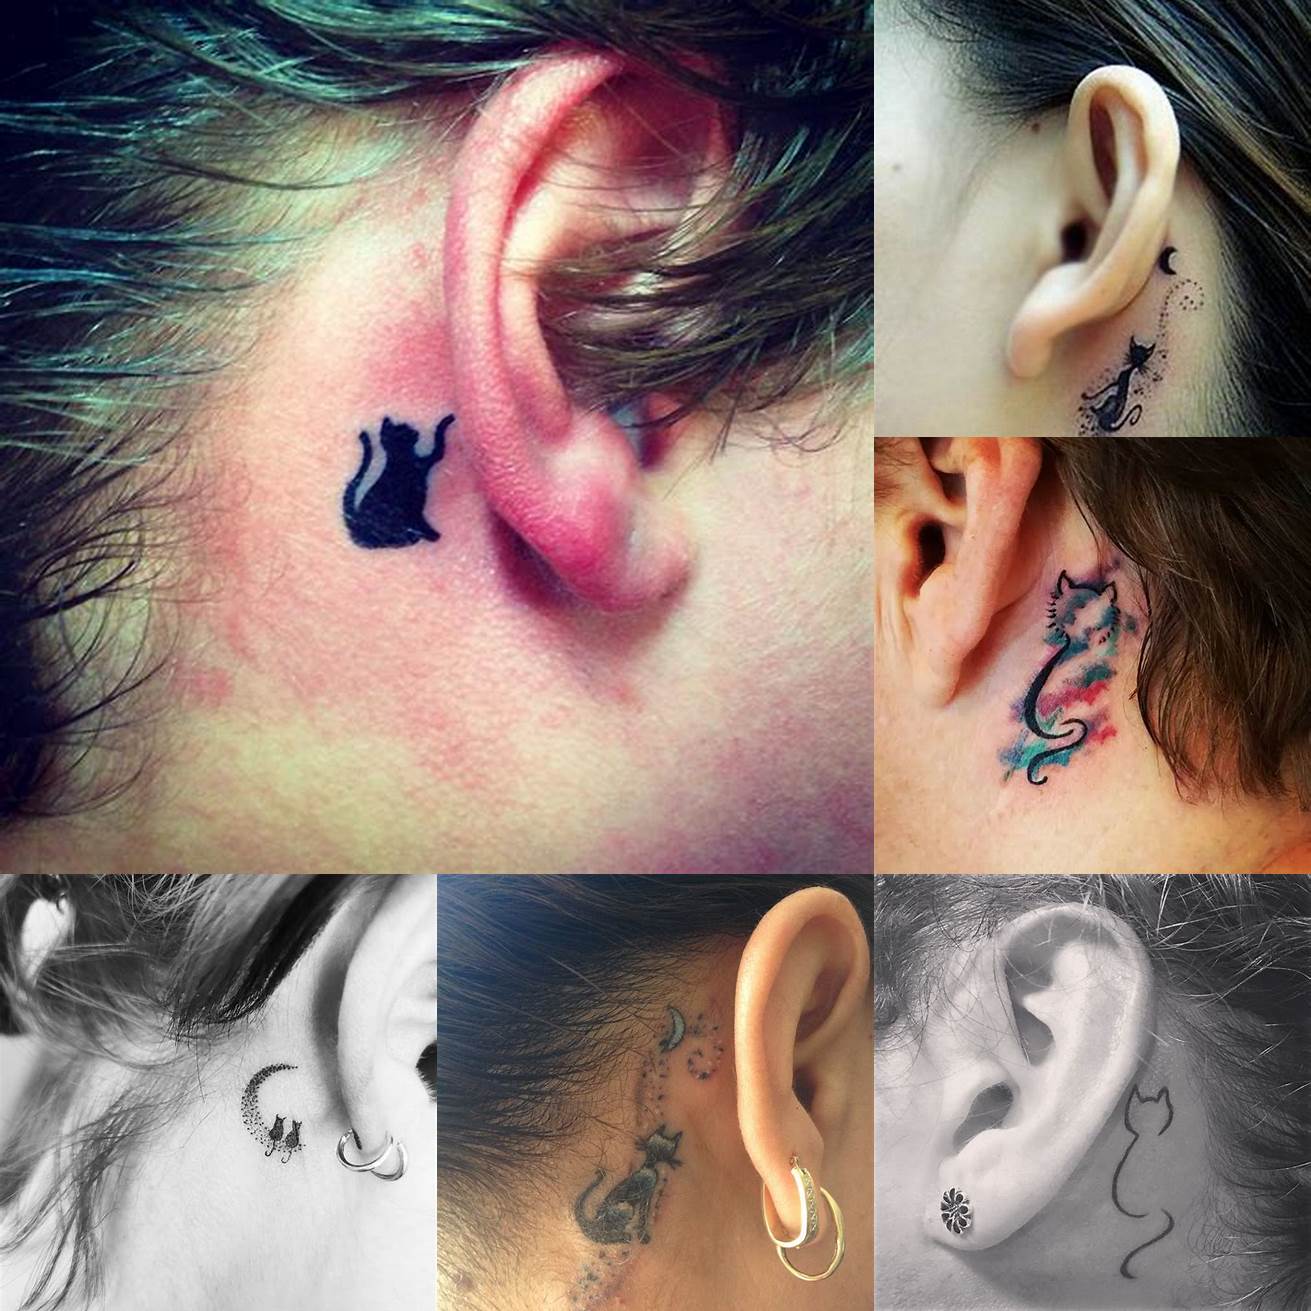 A cat behind the ear tattoo can have a special meaning